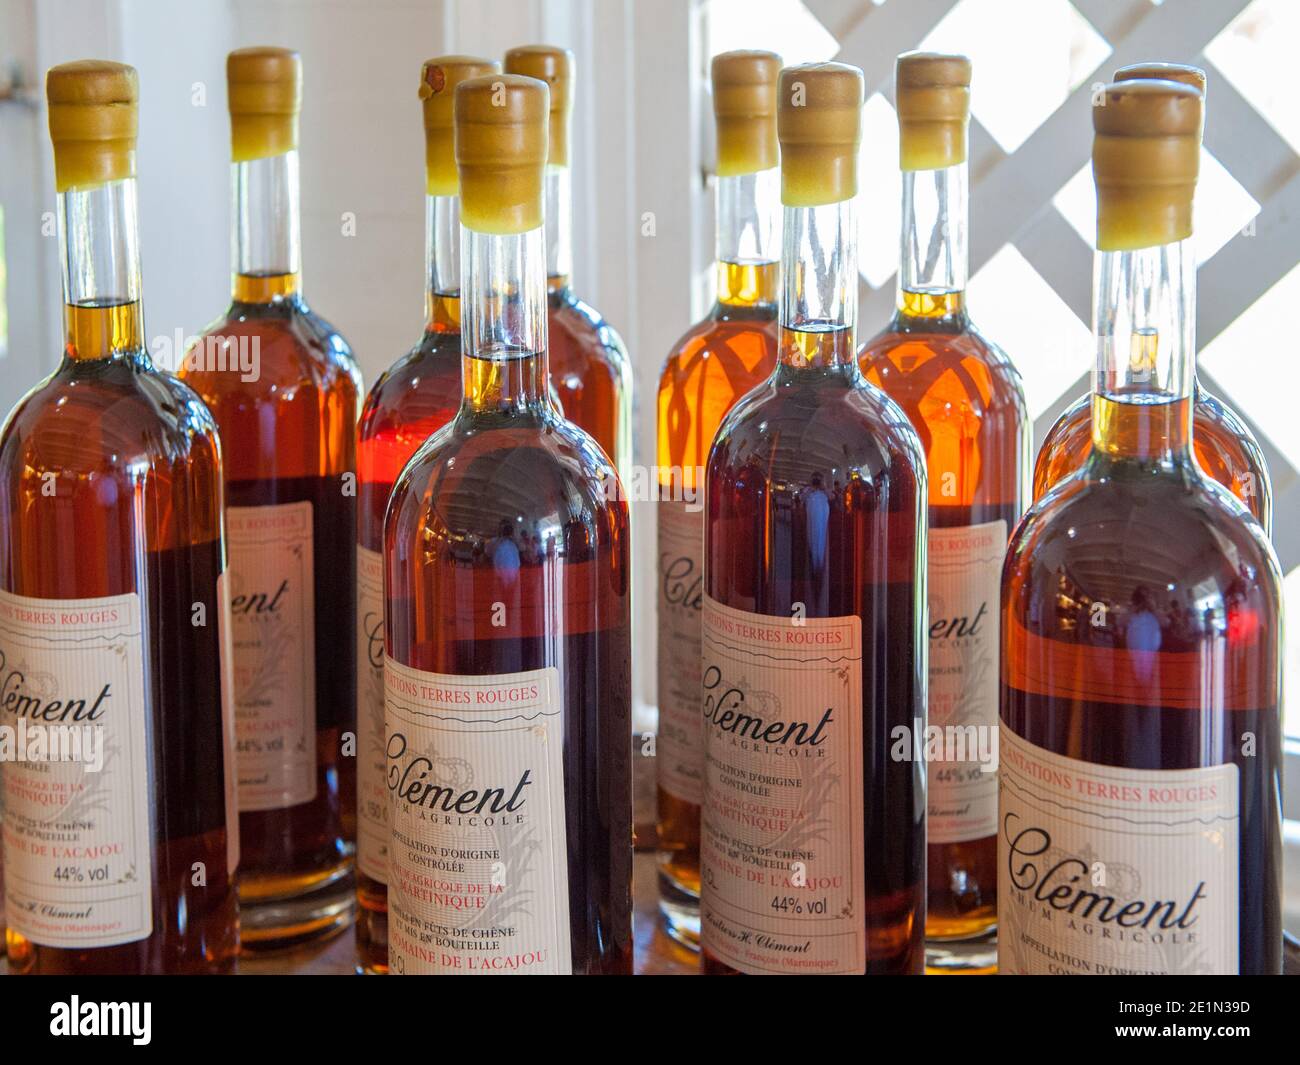 Tasting shop at Clément Rhum distillery, which is an old distillery in Martinique with traditions dating back to 1887. Stock Photo